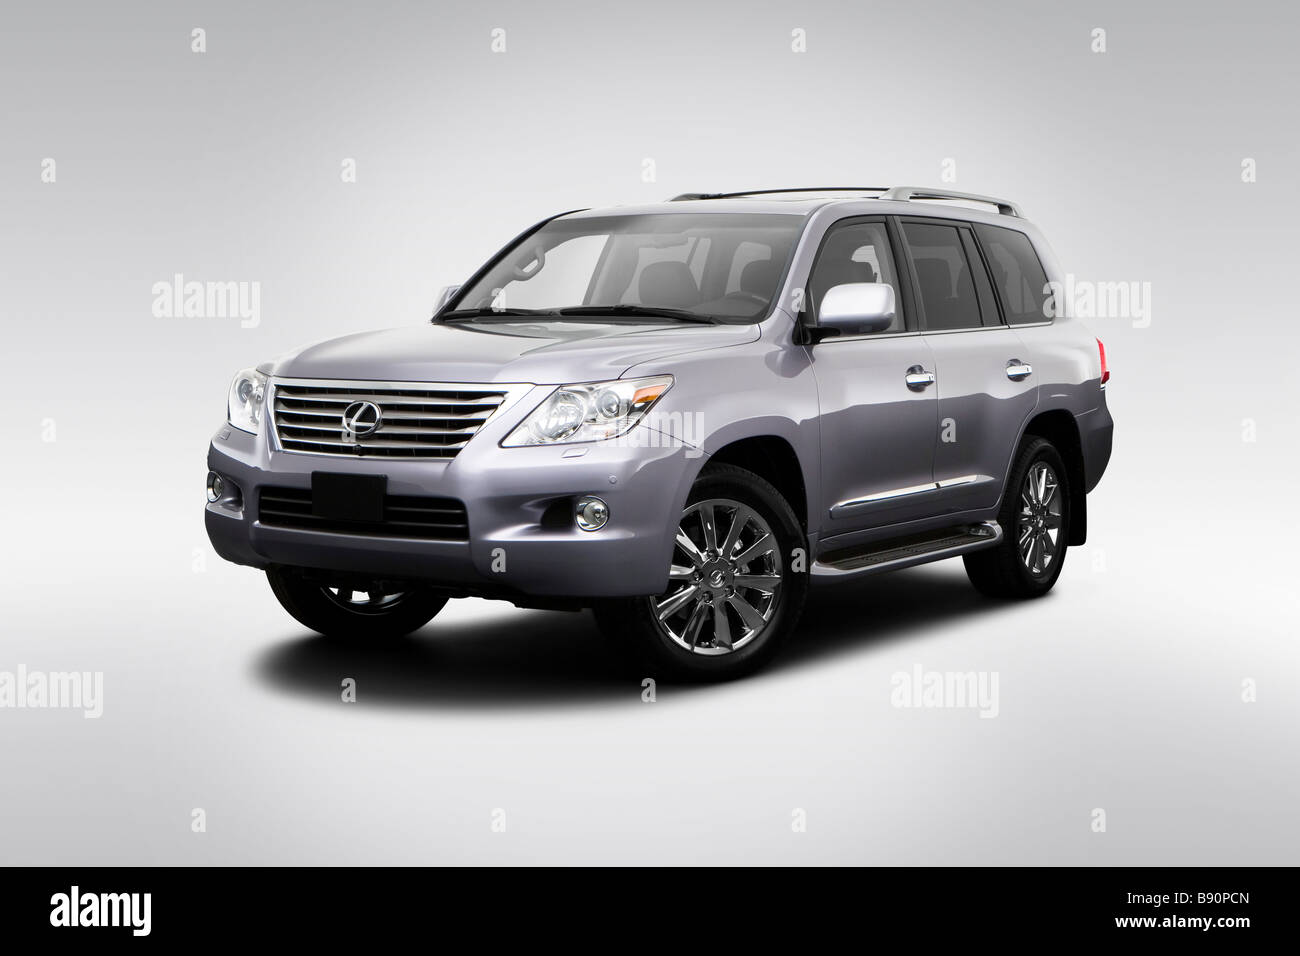 2009 Lexus LX LX570 in Gray - Front angle view Stock Photo